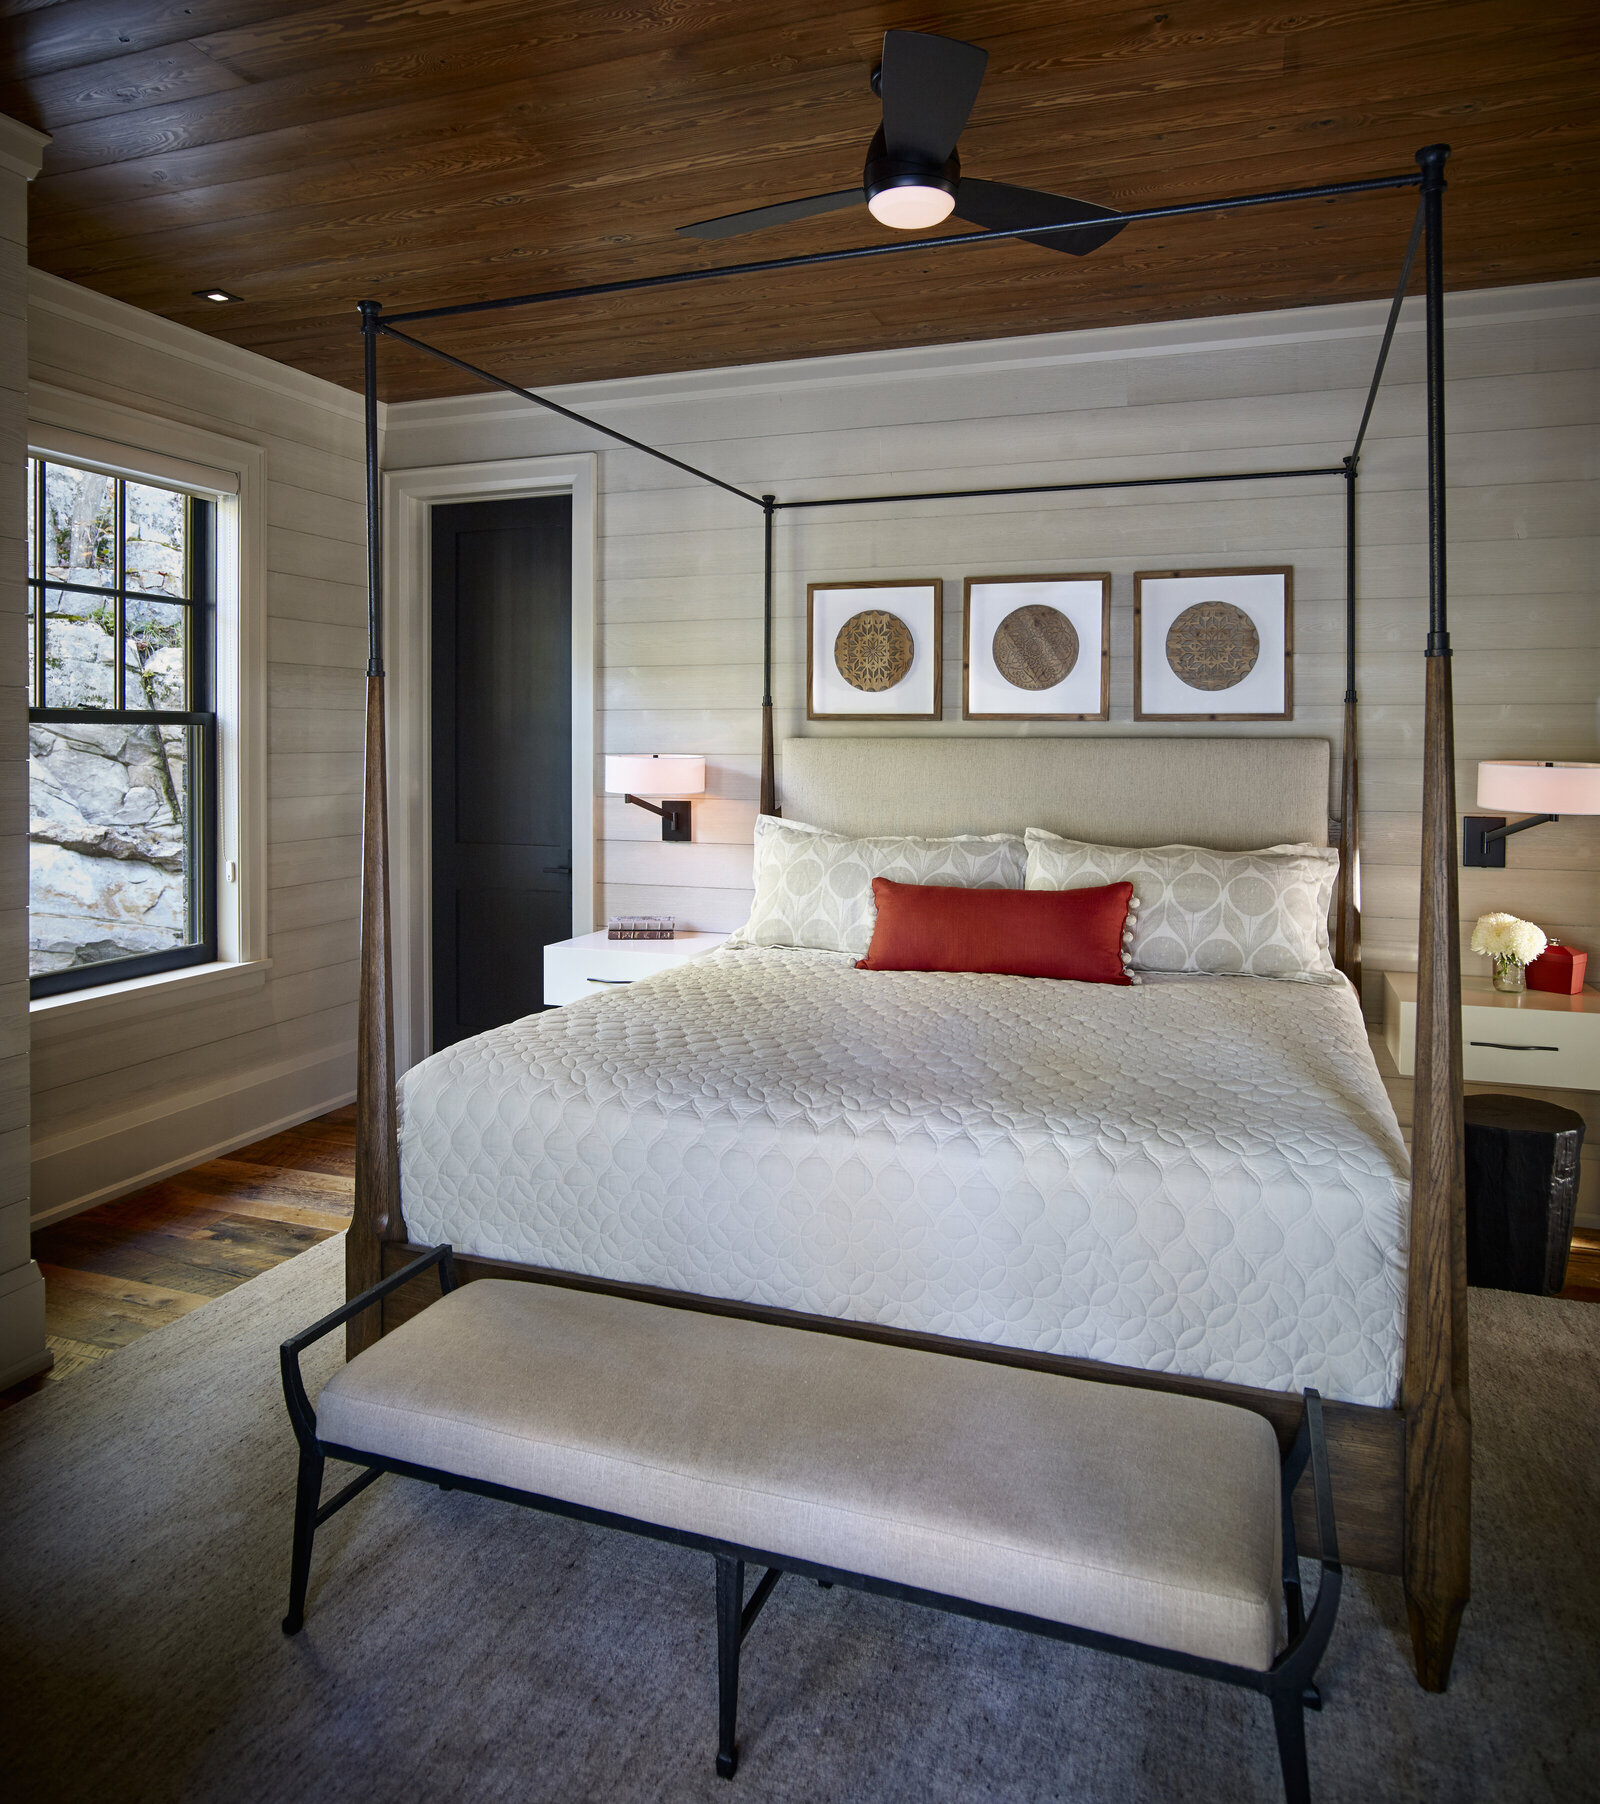 014-Port Carling-Cottage-Bedroom-Rustic-Canopy Bed